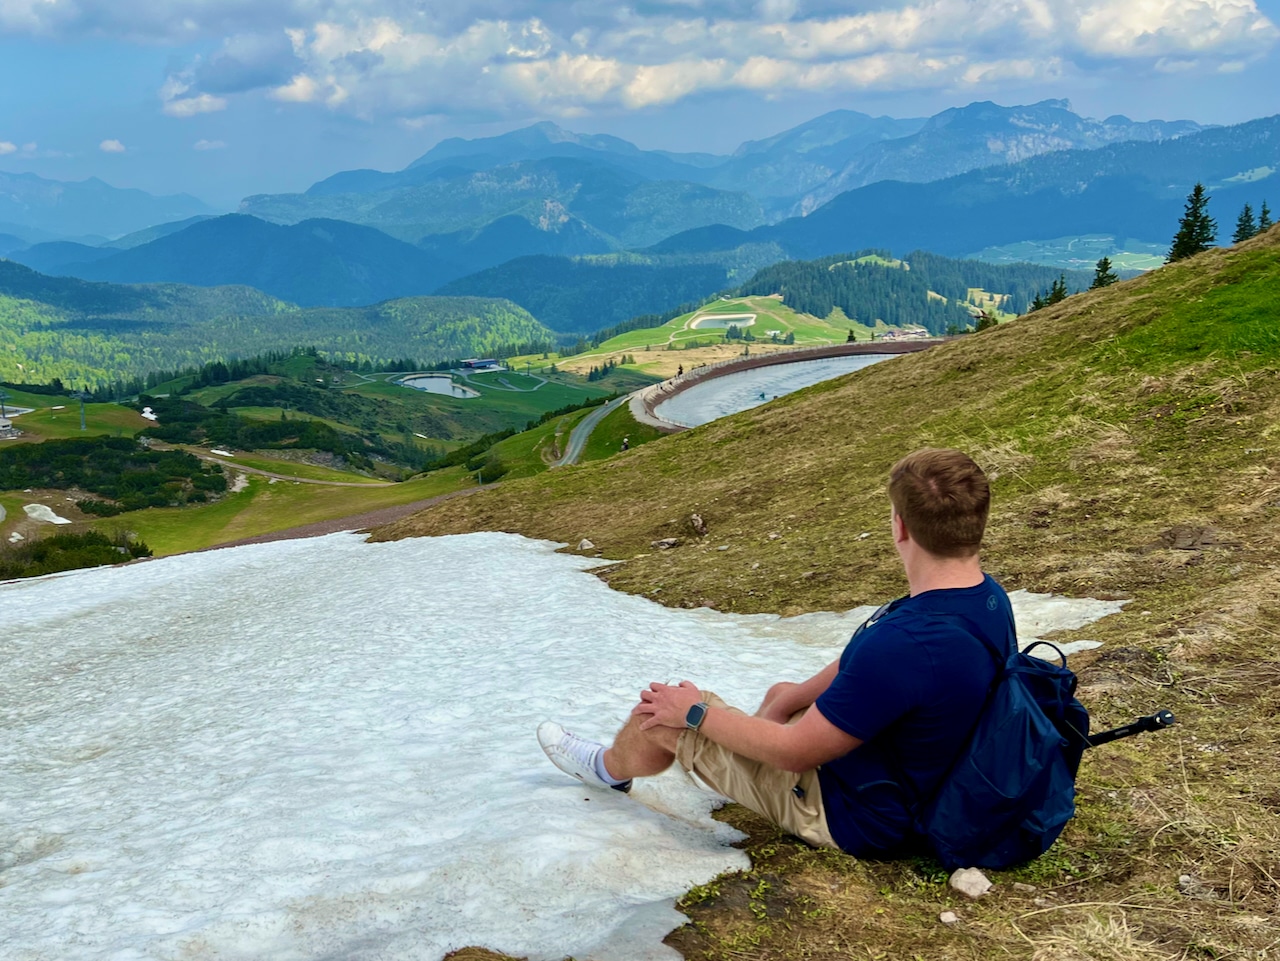 If you want to go high, you have to start early: In the Pillerrseetal you can do so much that the day flies by. So you need a good plan if you want to experience a lot. Travel Report Fieberbrunn Pillerseetal experiences tips sights activities